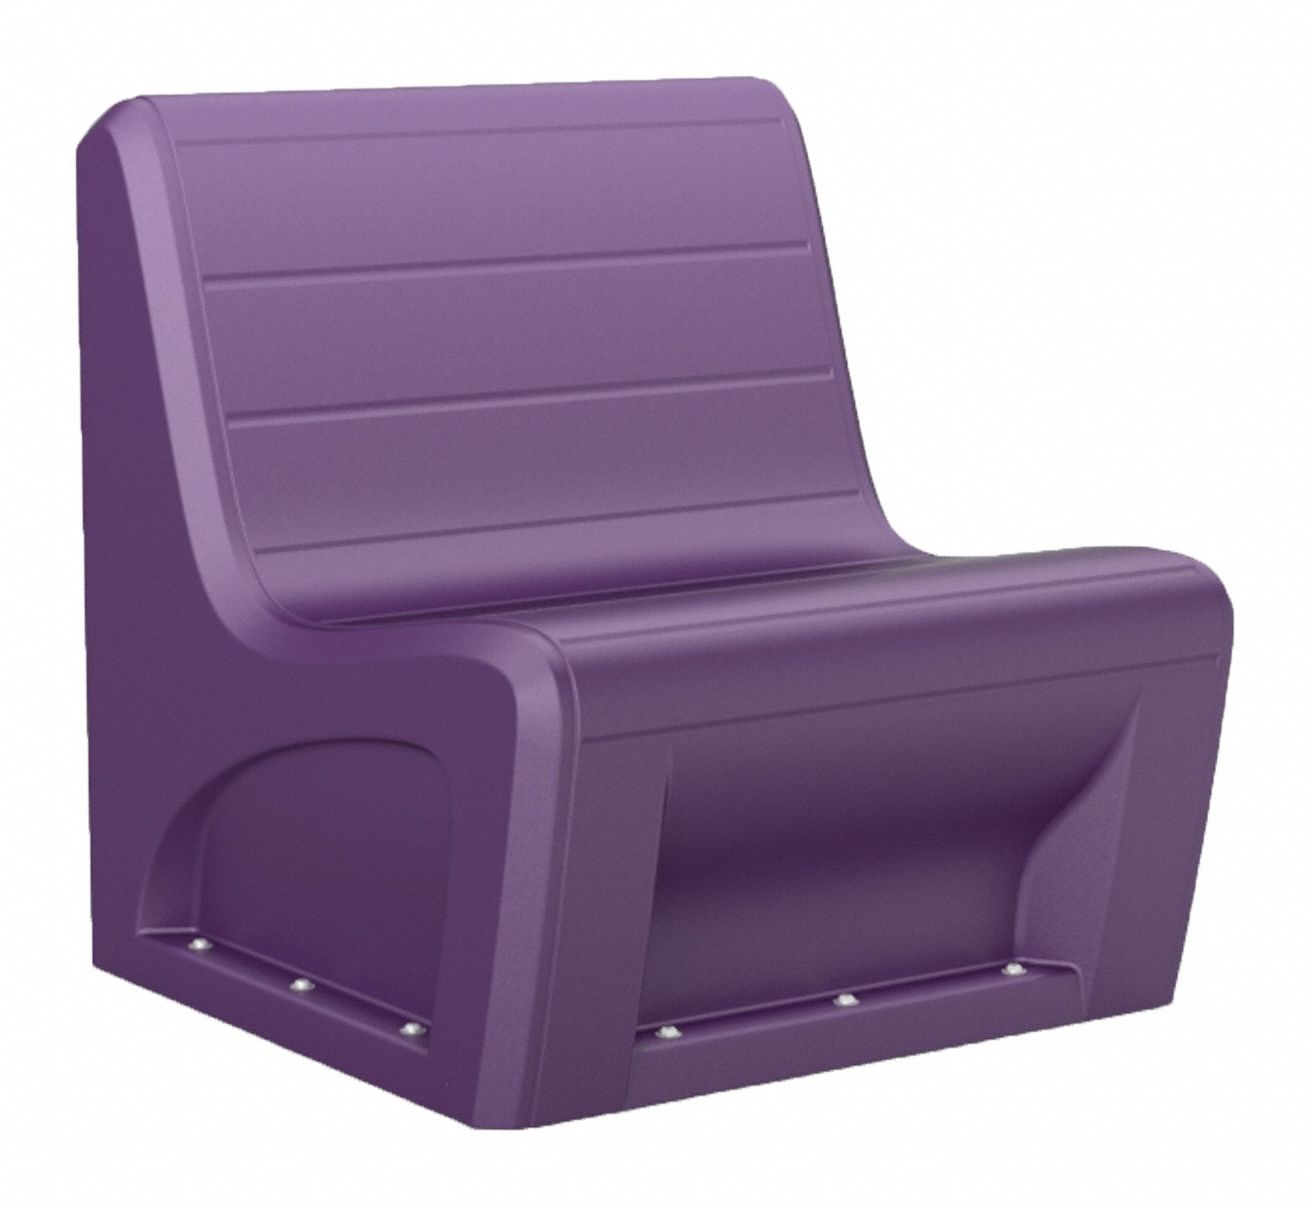 Sabre Sectional Chair w/Sand Port Indigo: 30 1/2 in Wd, 32 in Lg, 33 in Ht, 500 lb Wt Capacity